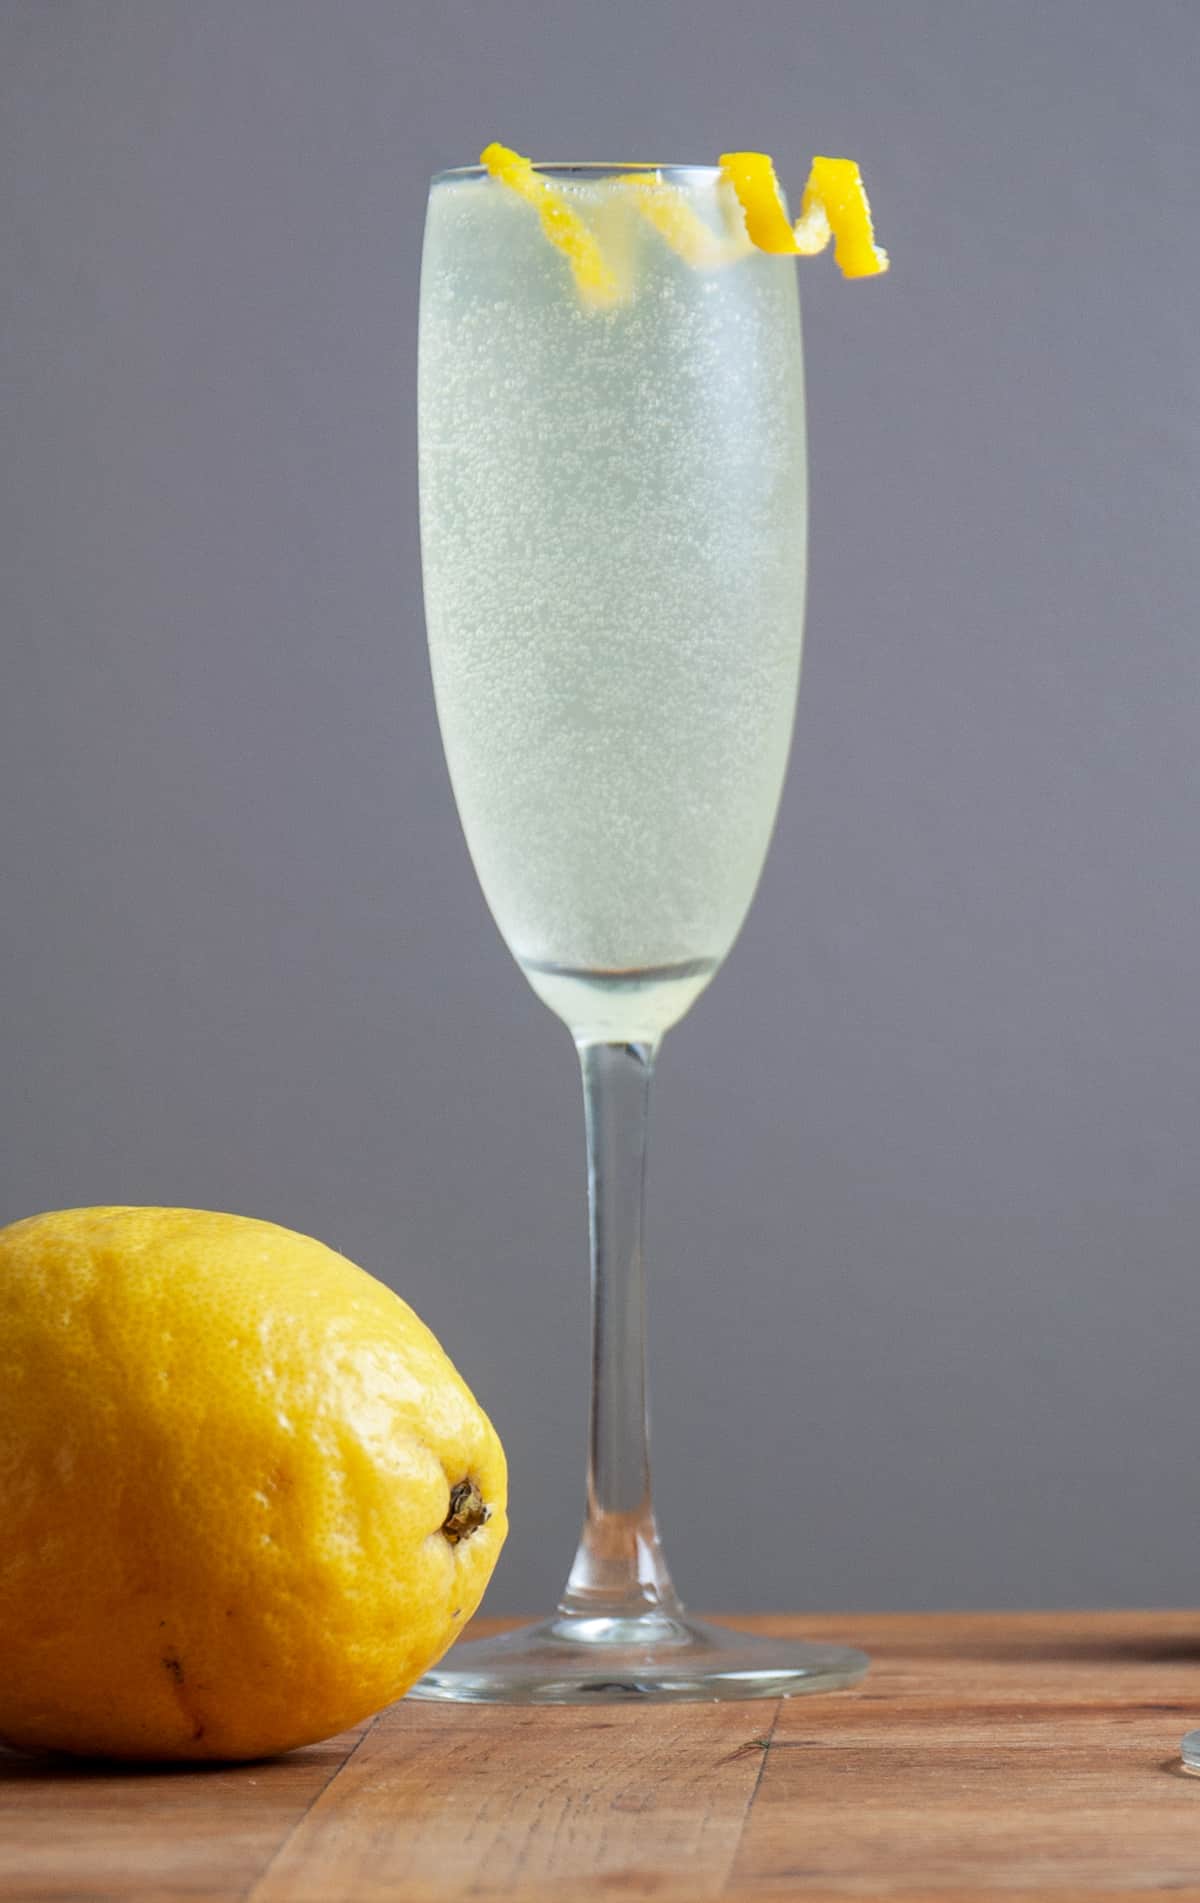 French 76 and 75 Recipes - Ramshackle Pantry